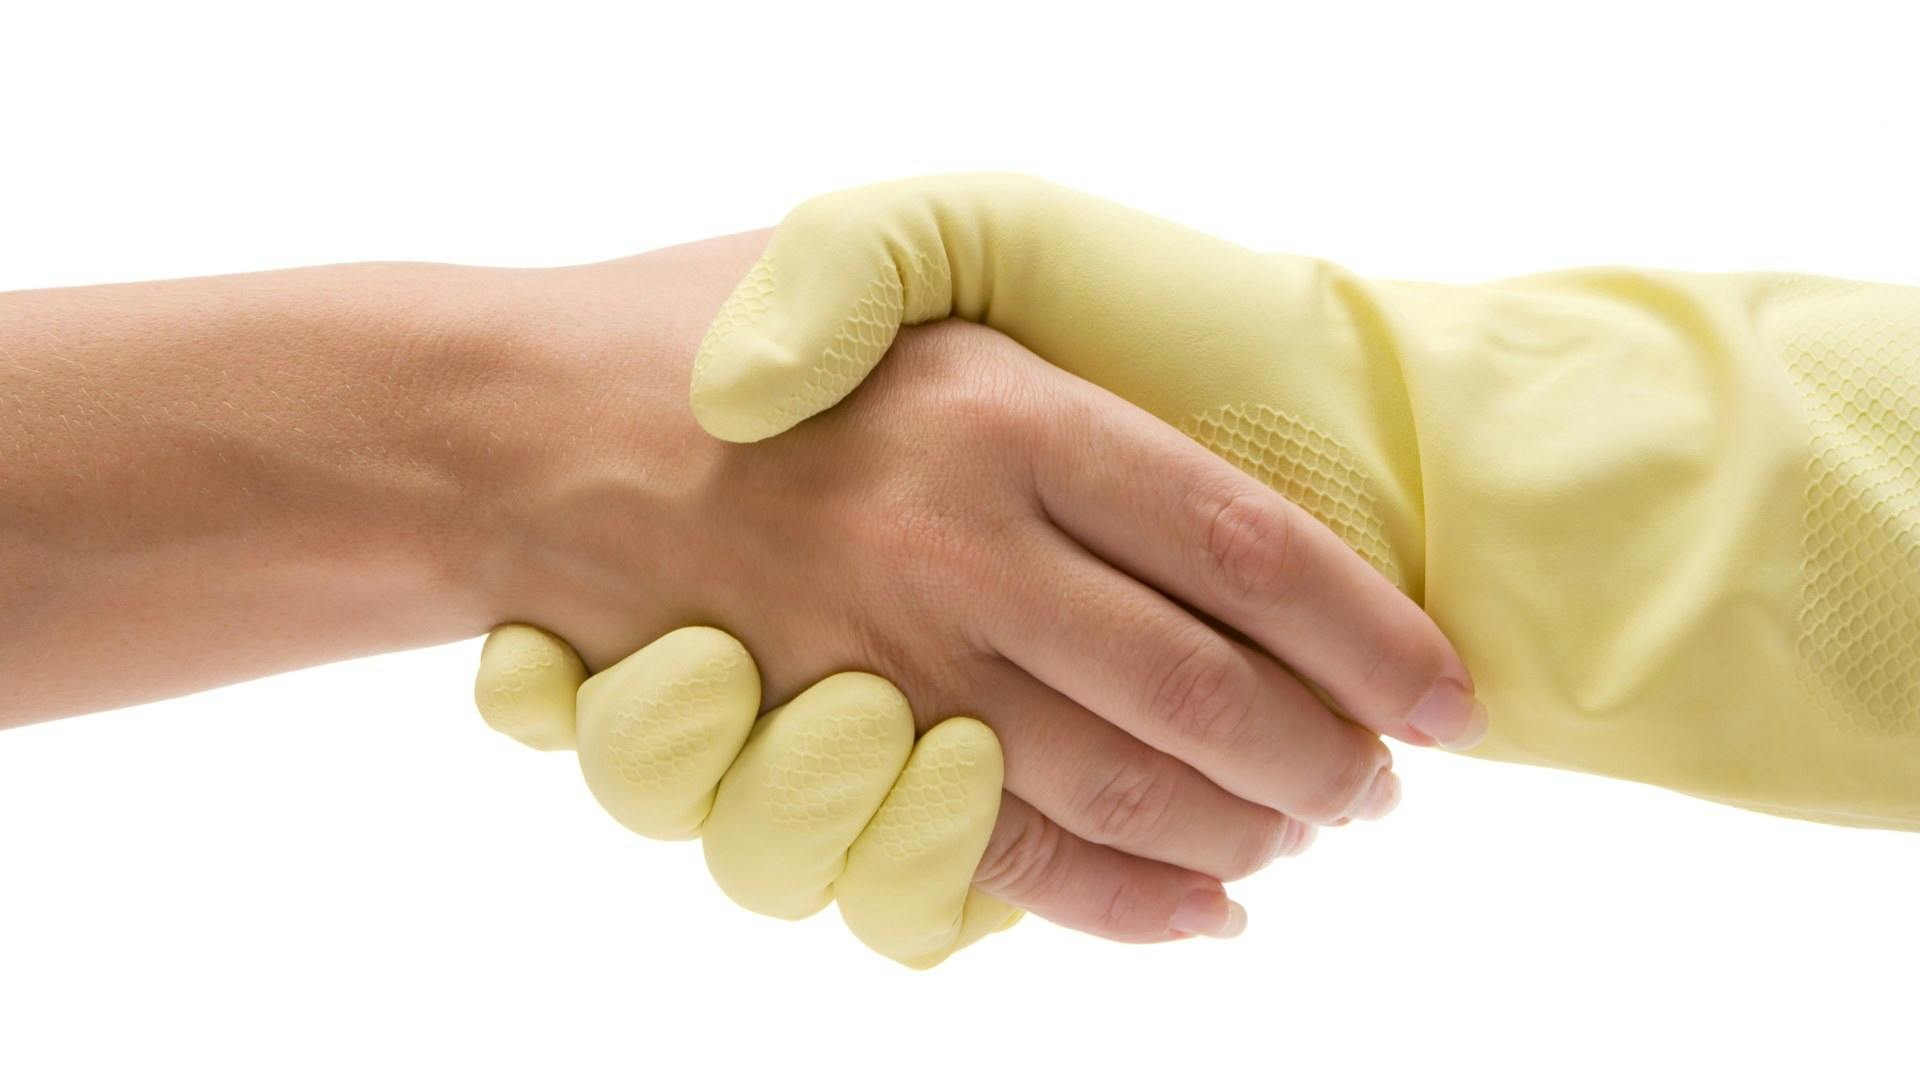 Cleaner shaking hand with client